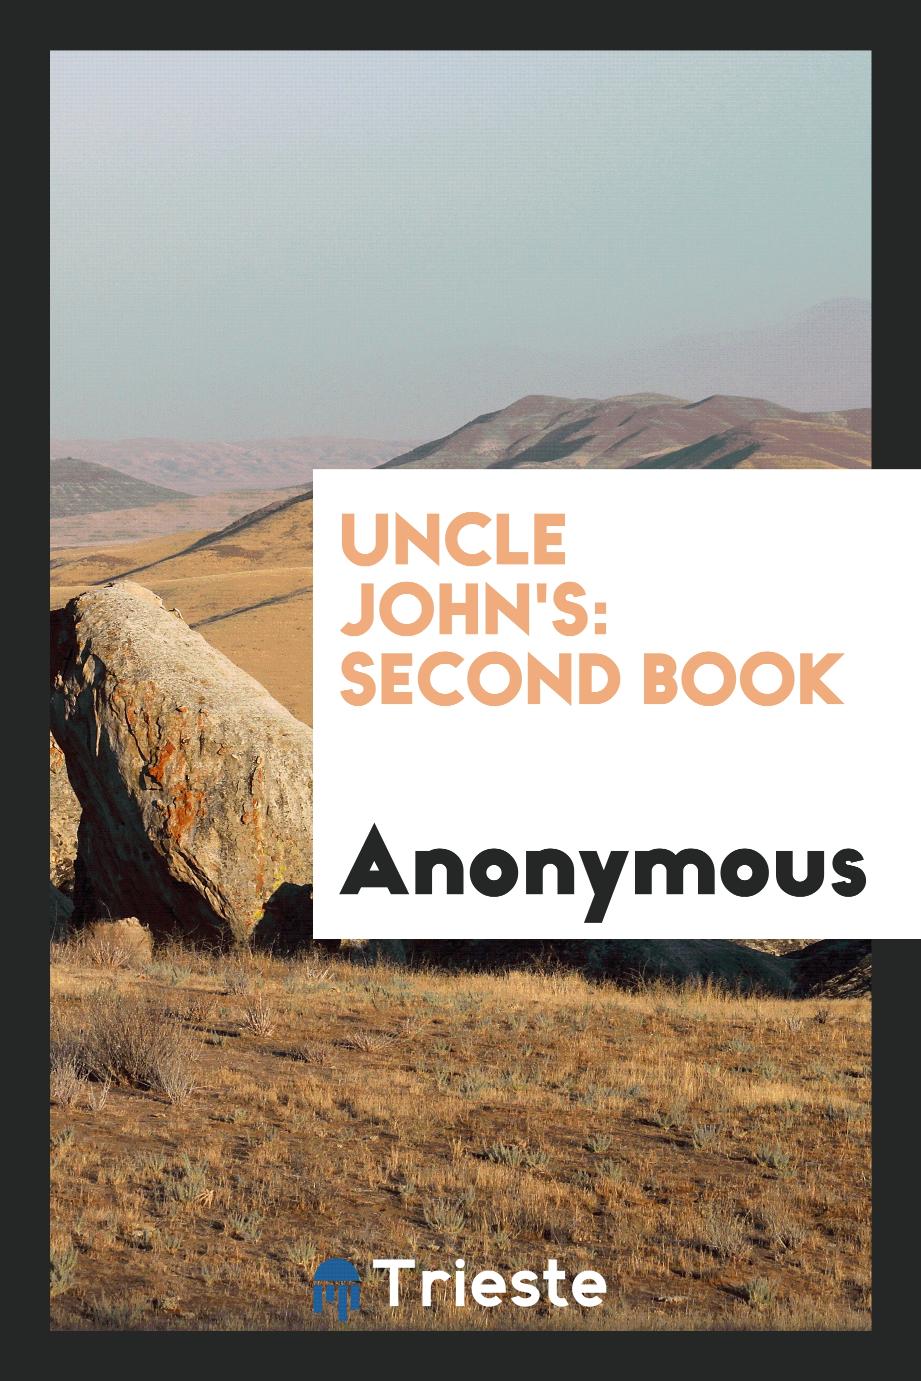 Uncle John's: Second Book